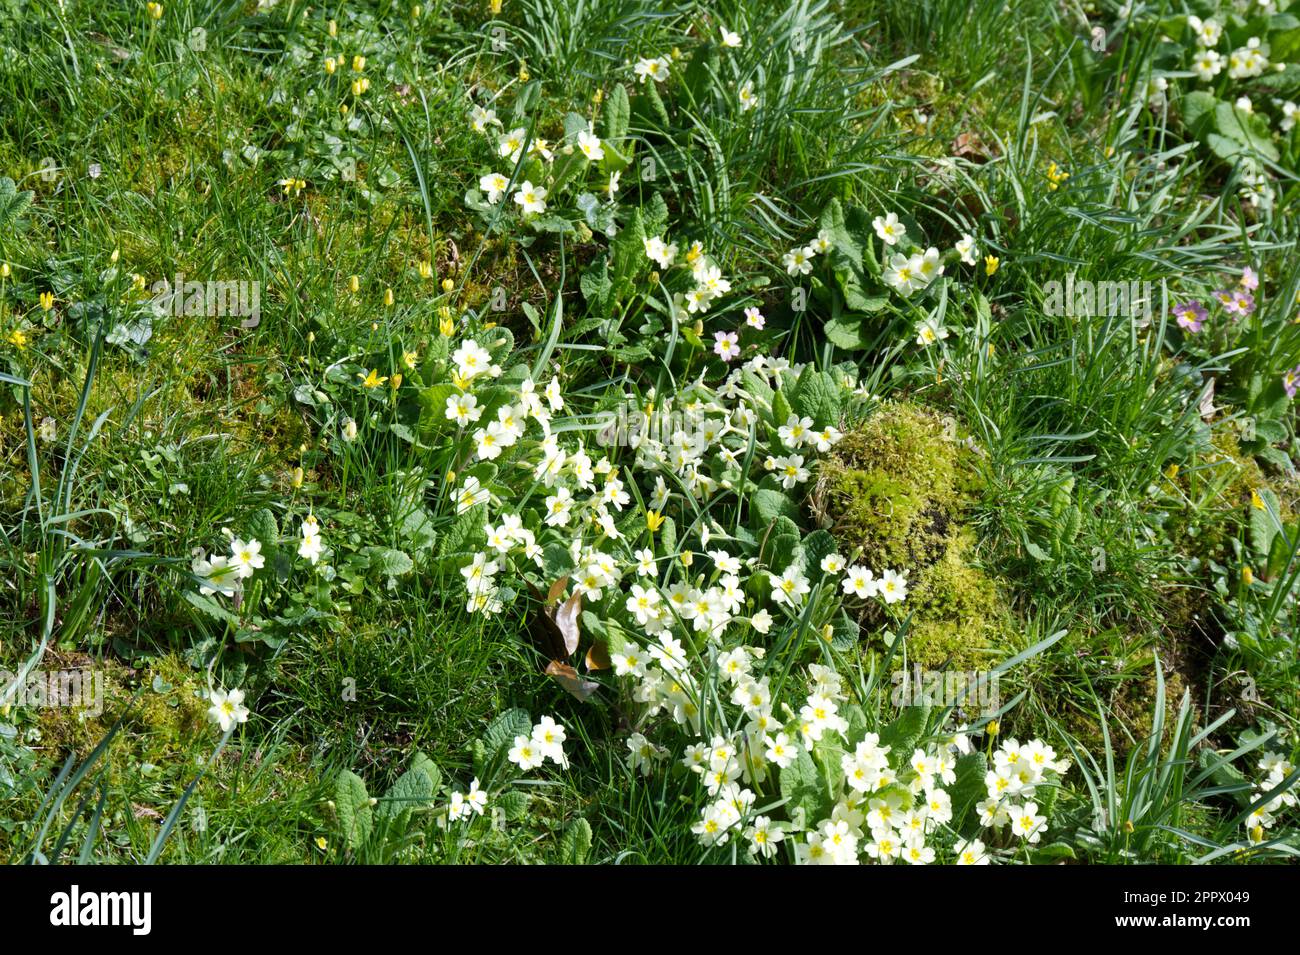 Pale yellow spring flowers of wild primrose, Primula vulgaris, on a mossy bank with celandines, Ficaria verna, and snowdrop foliage UK April Stock Photo